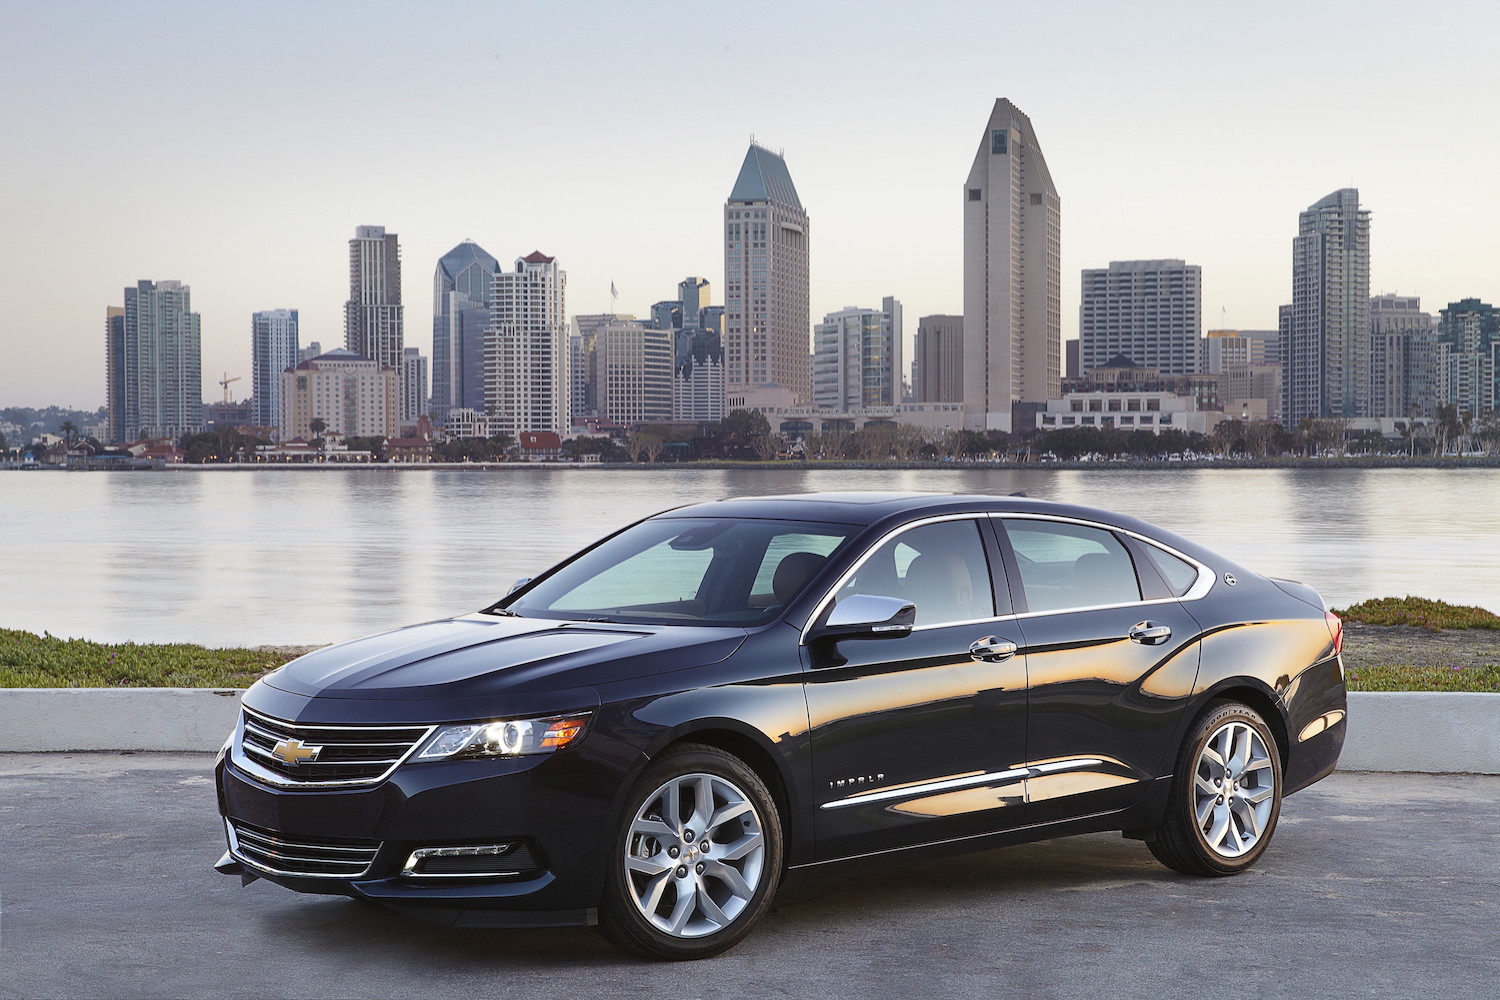 2018 Chevrolet Impala is one of 2021's discontinued cars | General Motors